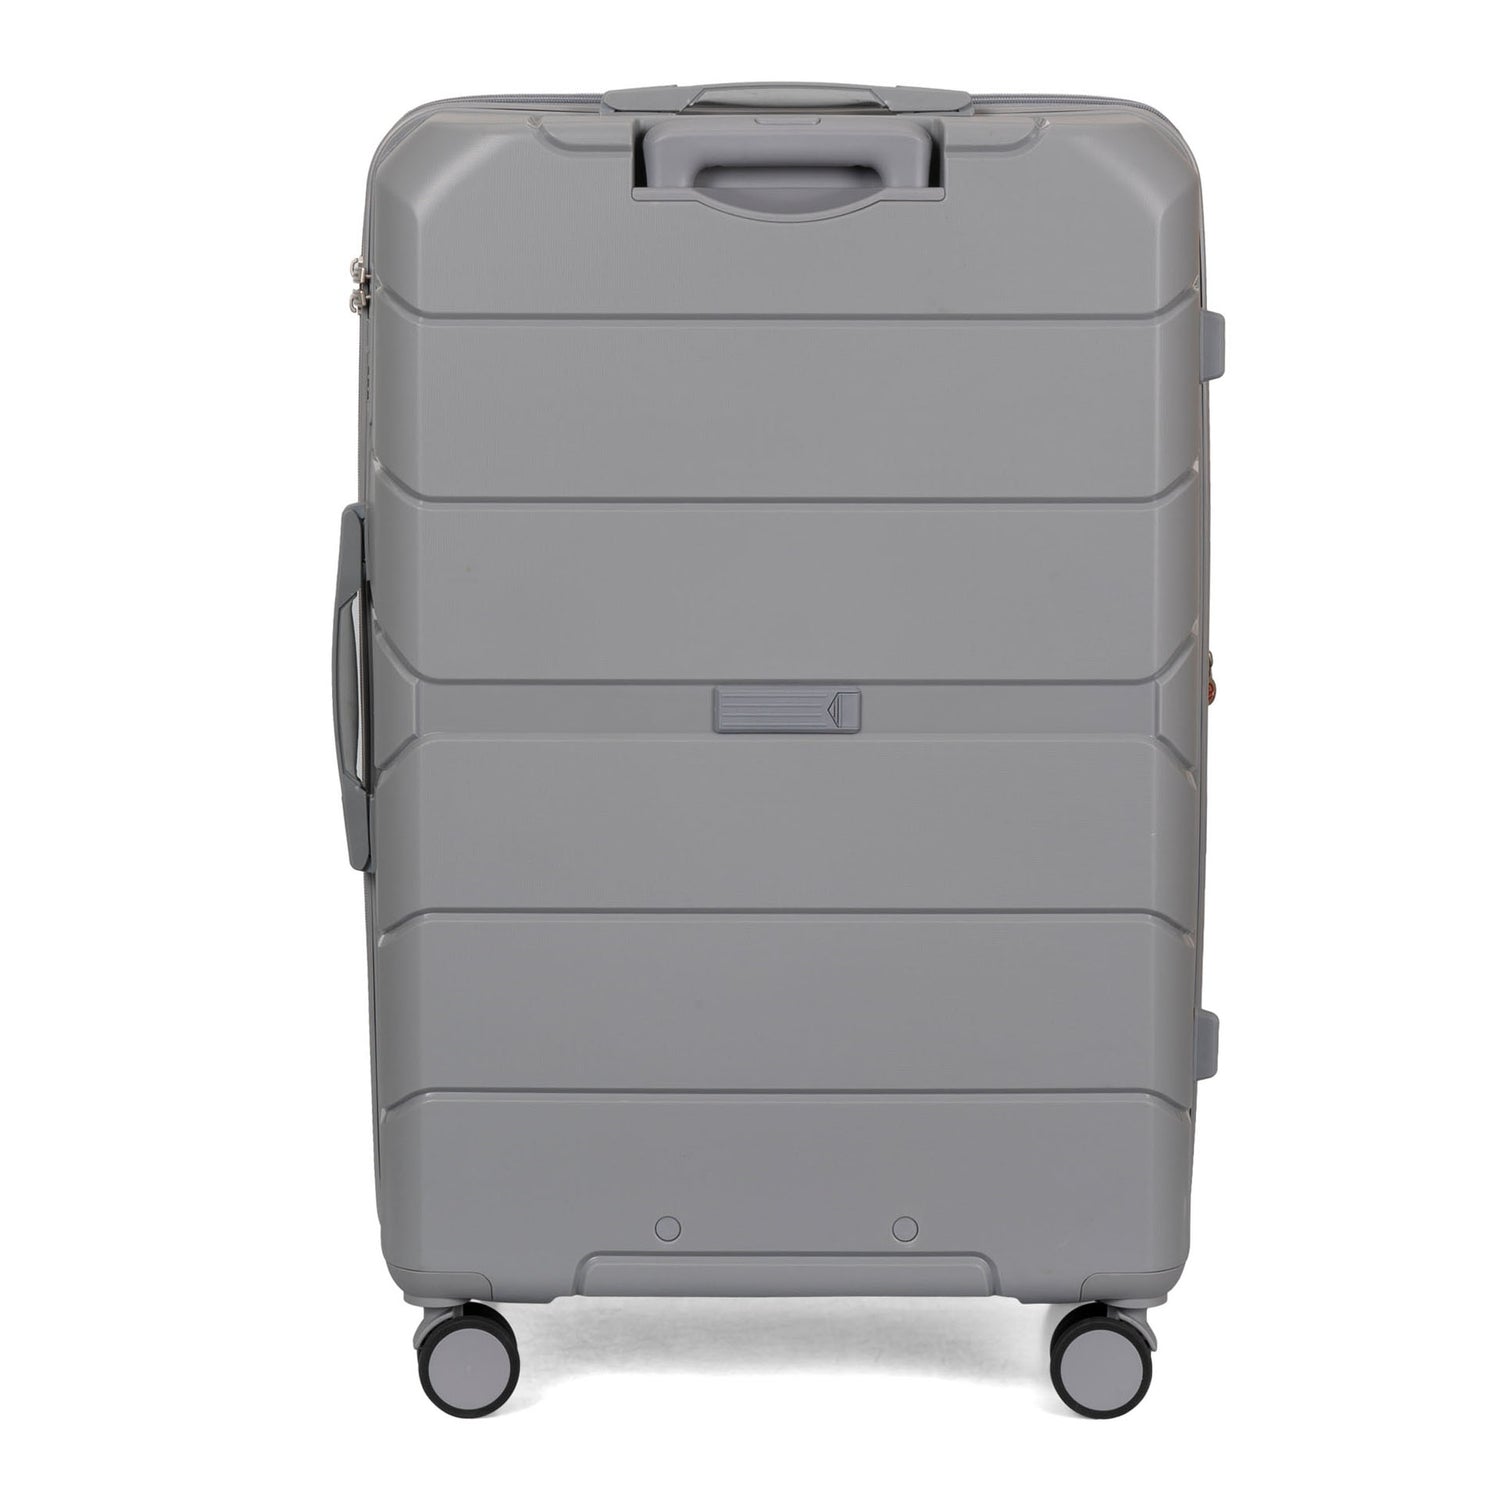 Back side view of a balck hard side luggage called Altitude designed by Air Canada sold at Bentley, showcasing its resistant shell texture